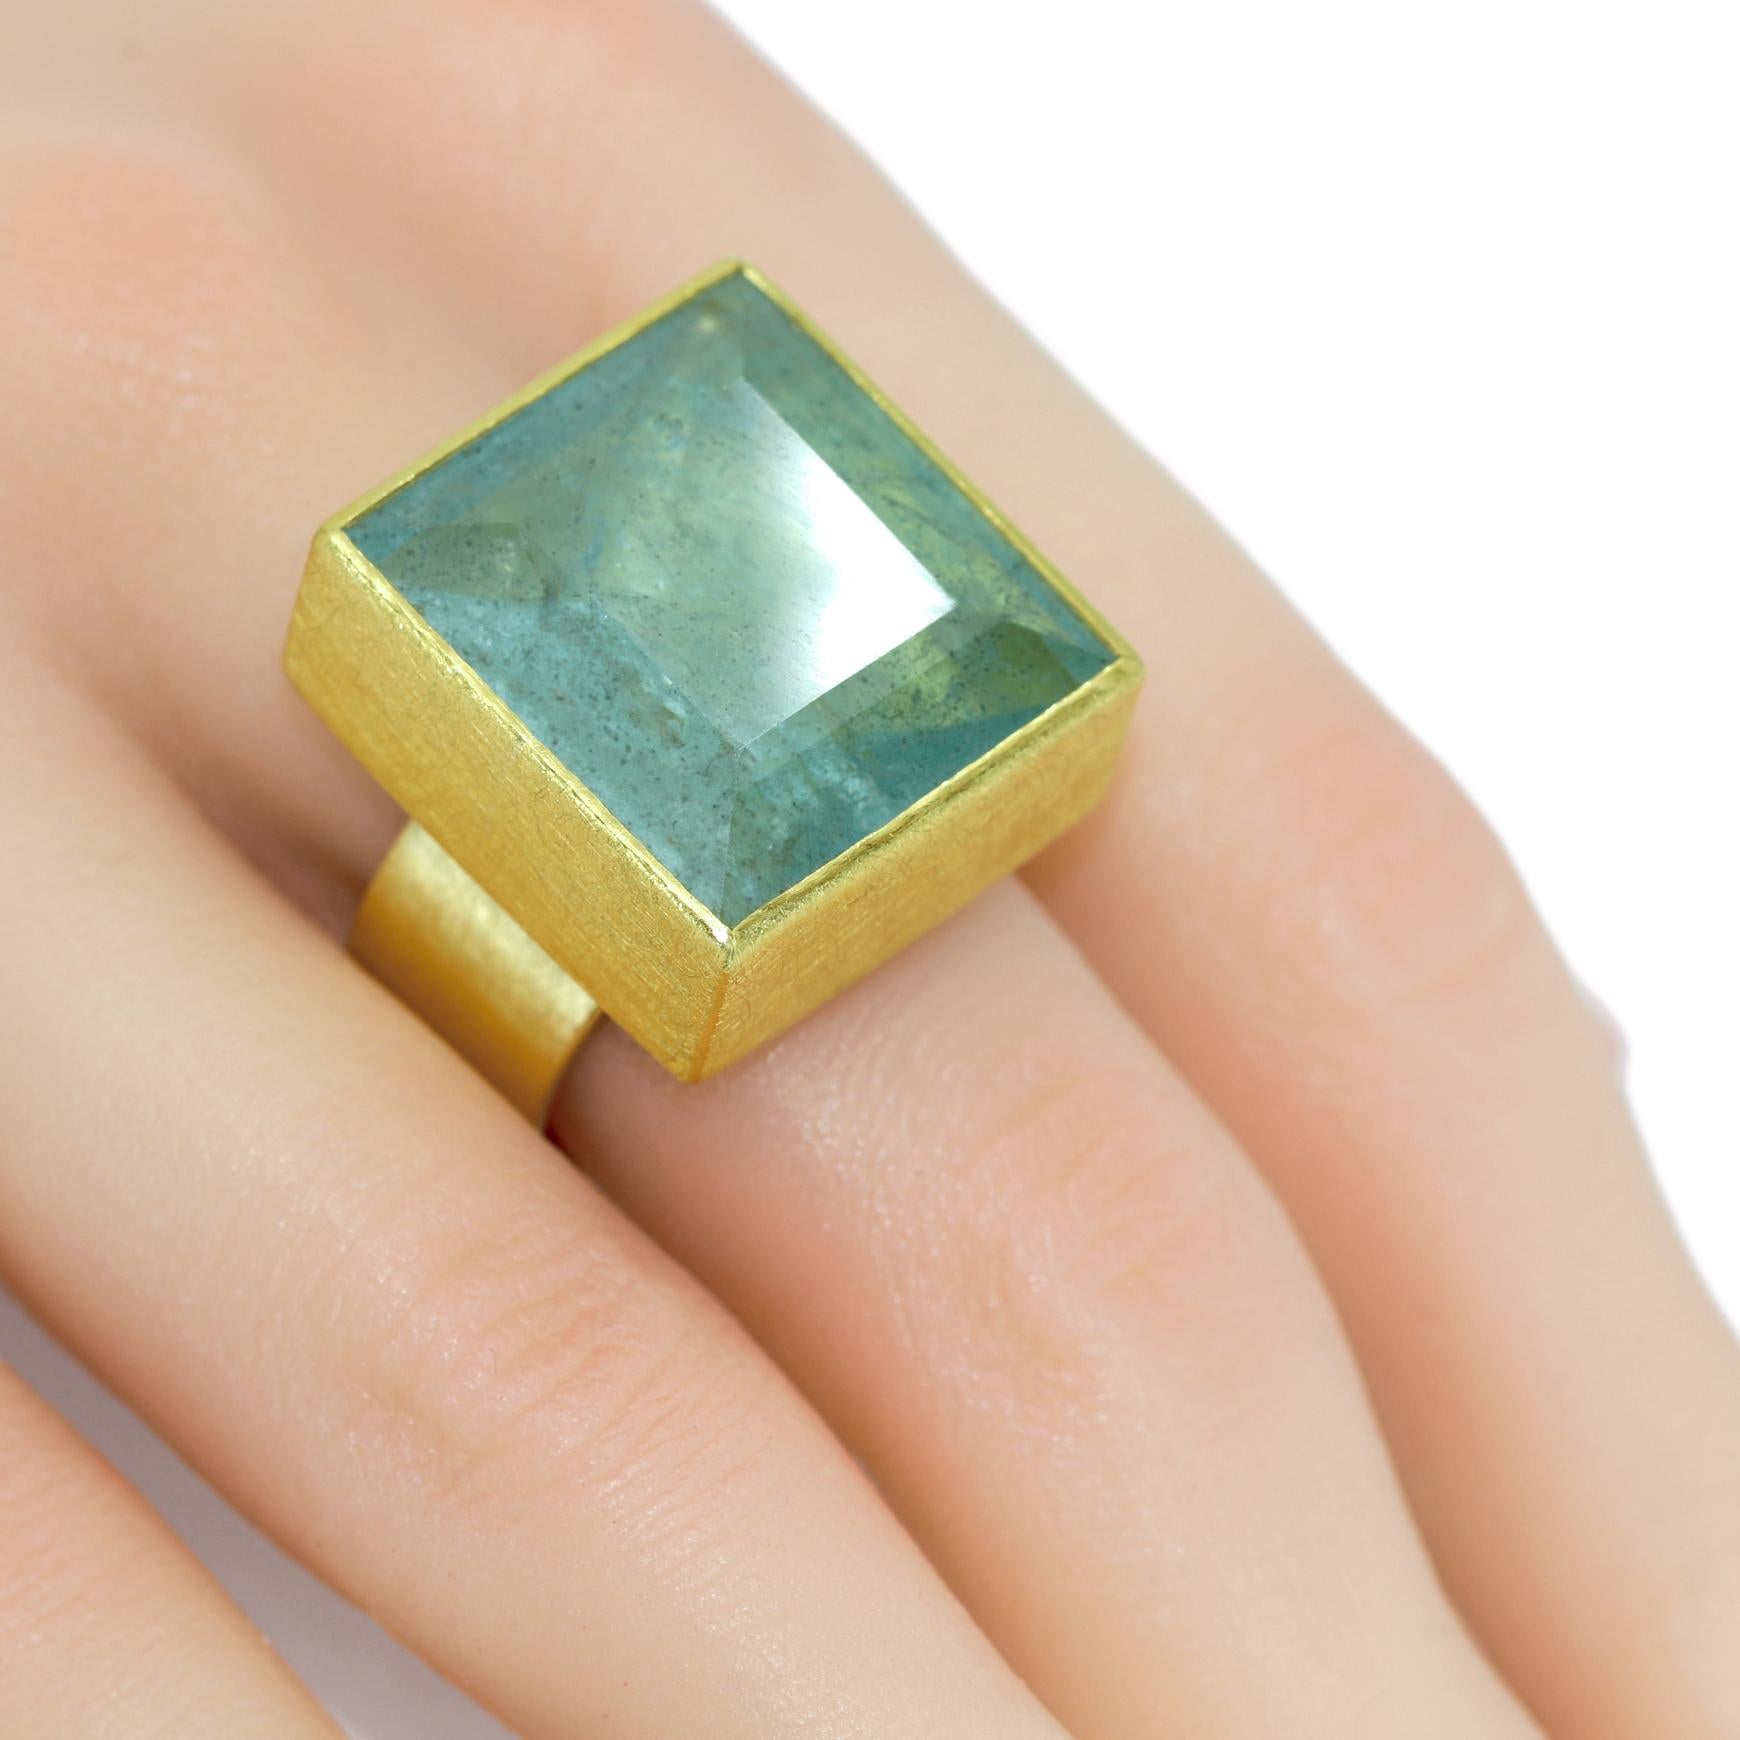 One of a Kind Statement Ring hand-fabricated by acclaimed jewelry maker Petra Class in signature-finished 22k yellow gold featuring a remarkable and unusual 28.0 carat natural faceted aquamarine square bezel-set atop a 10mm wide 18k yellow gold